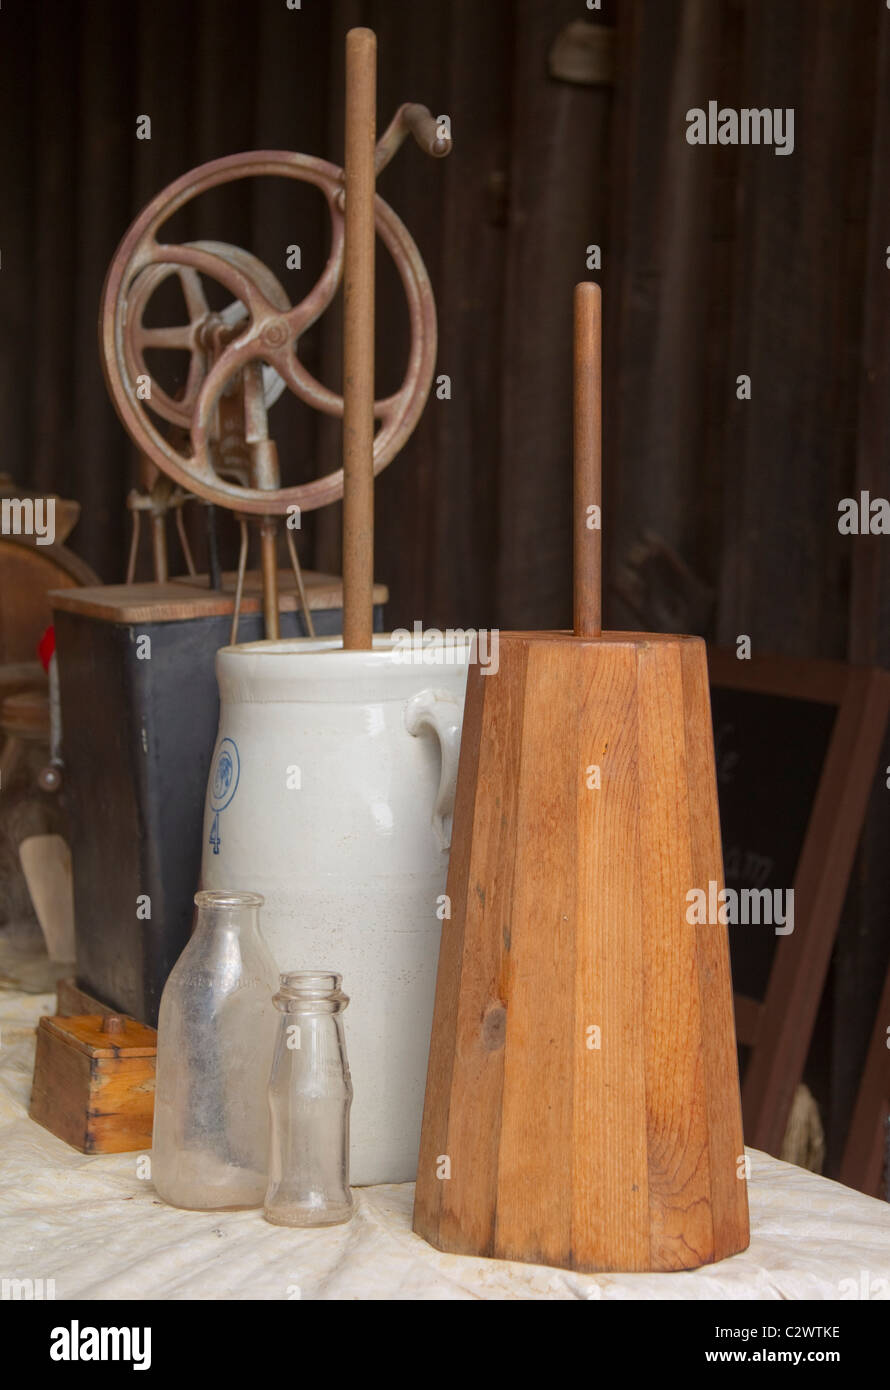 A vintage butter churn and milk bottles Stock Photo